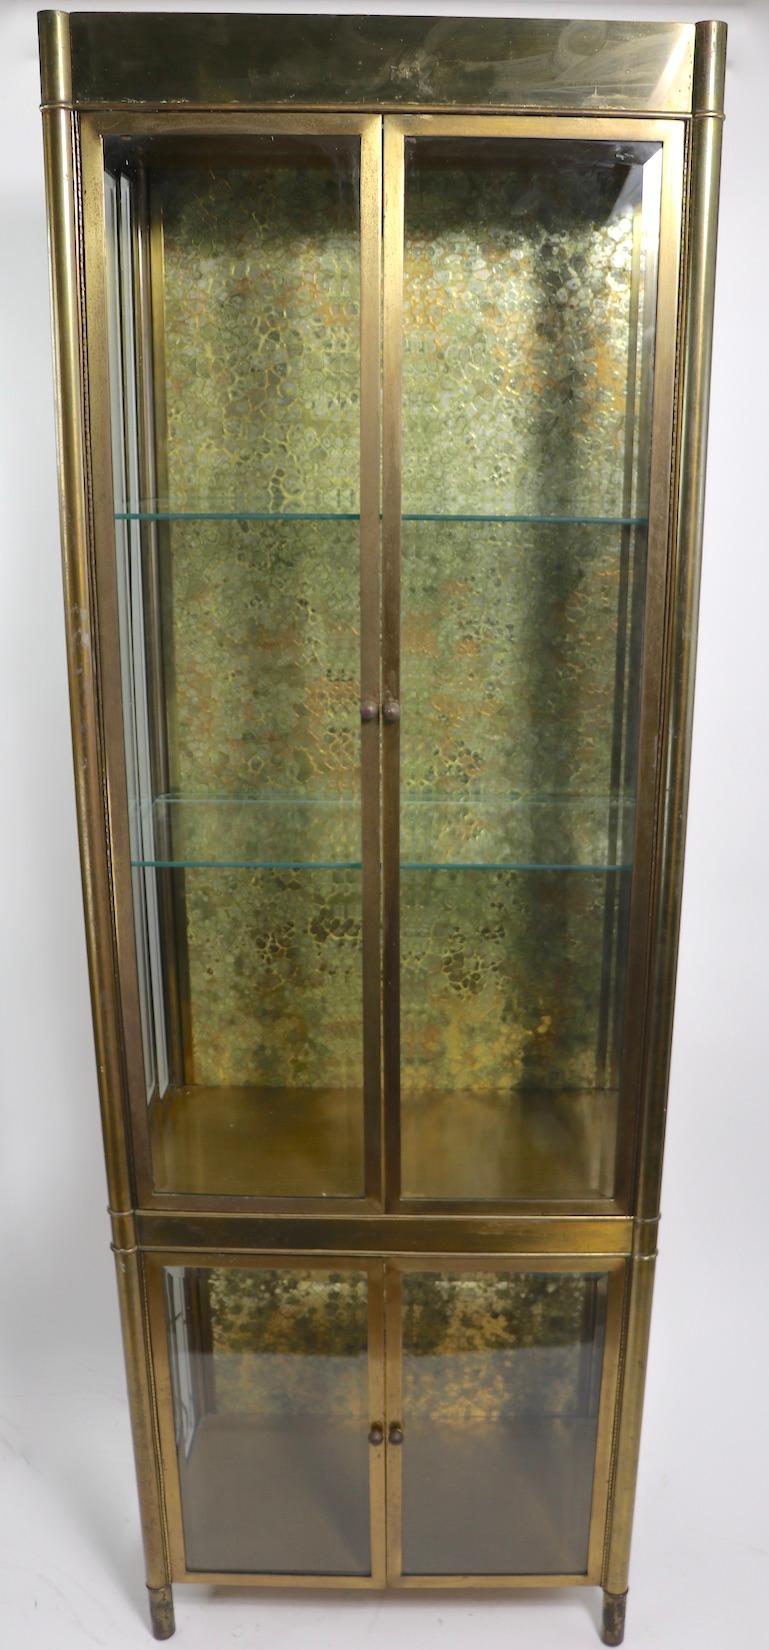 Late 20th Century Brass and Glass Vitrine Display Cabinet by Mastercraft